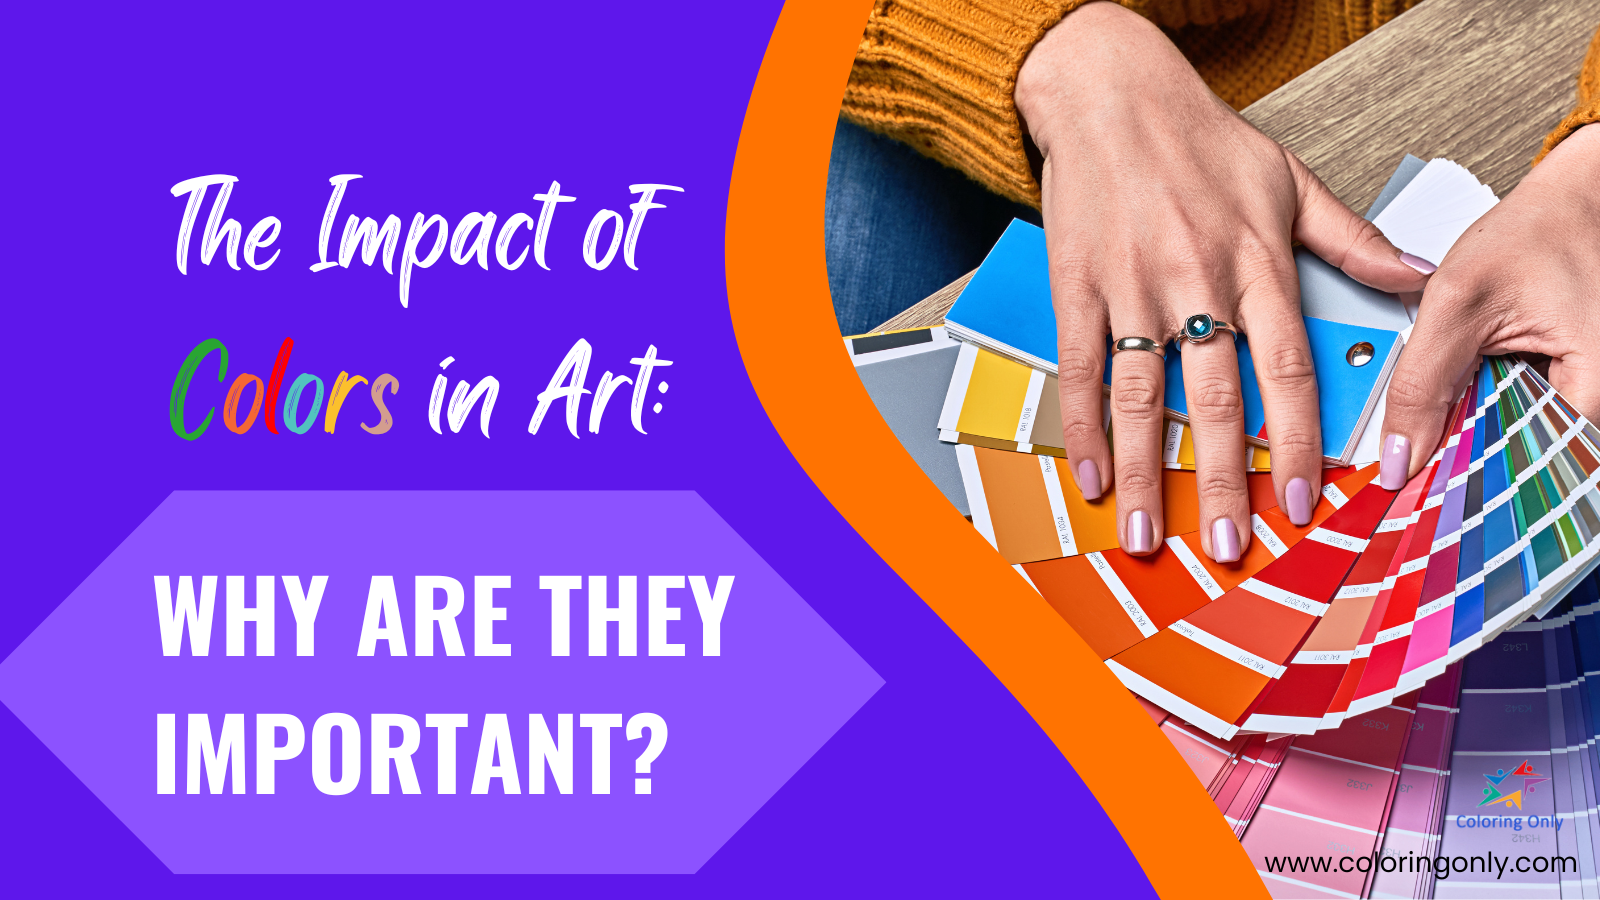 The Impact of Colors in Art: Why Are They Important?